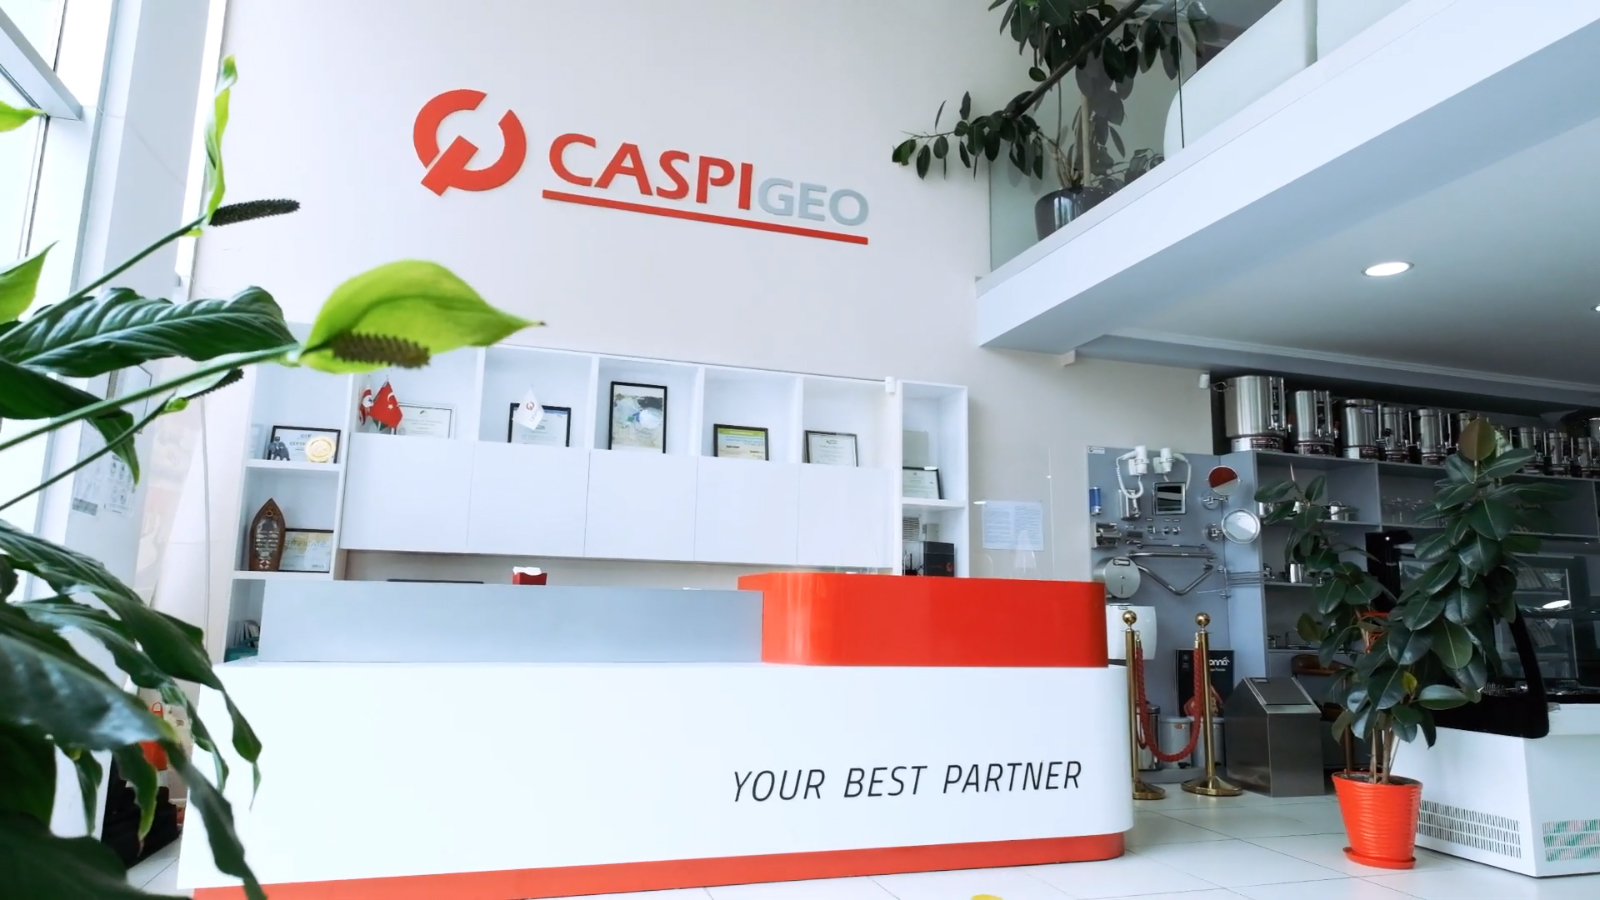 CaspiGroup offers industrial kitchen and laundry equipment